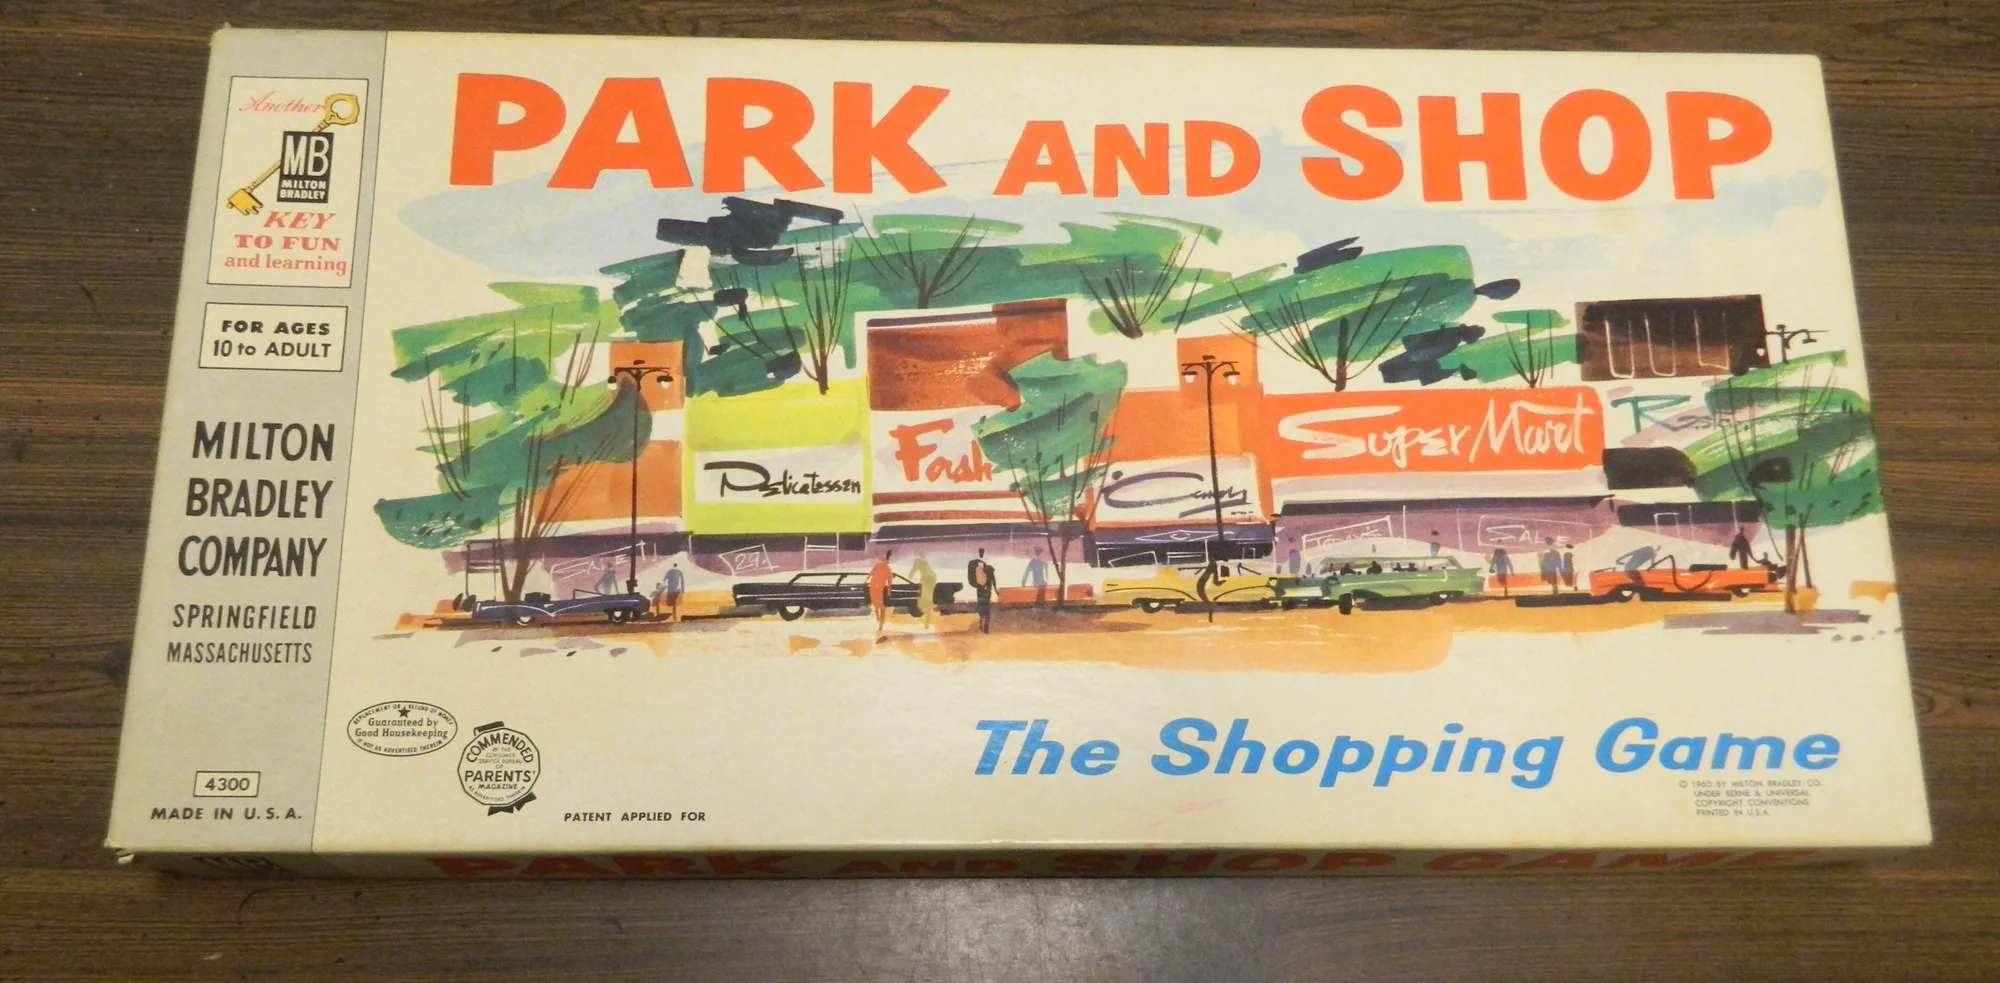 Box for Park and Shop